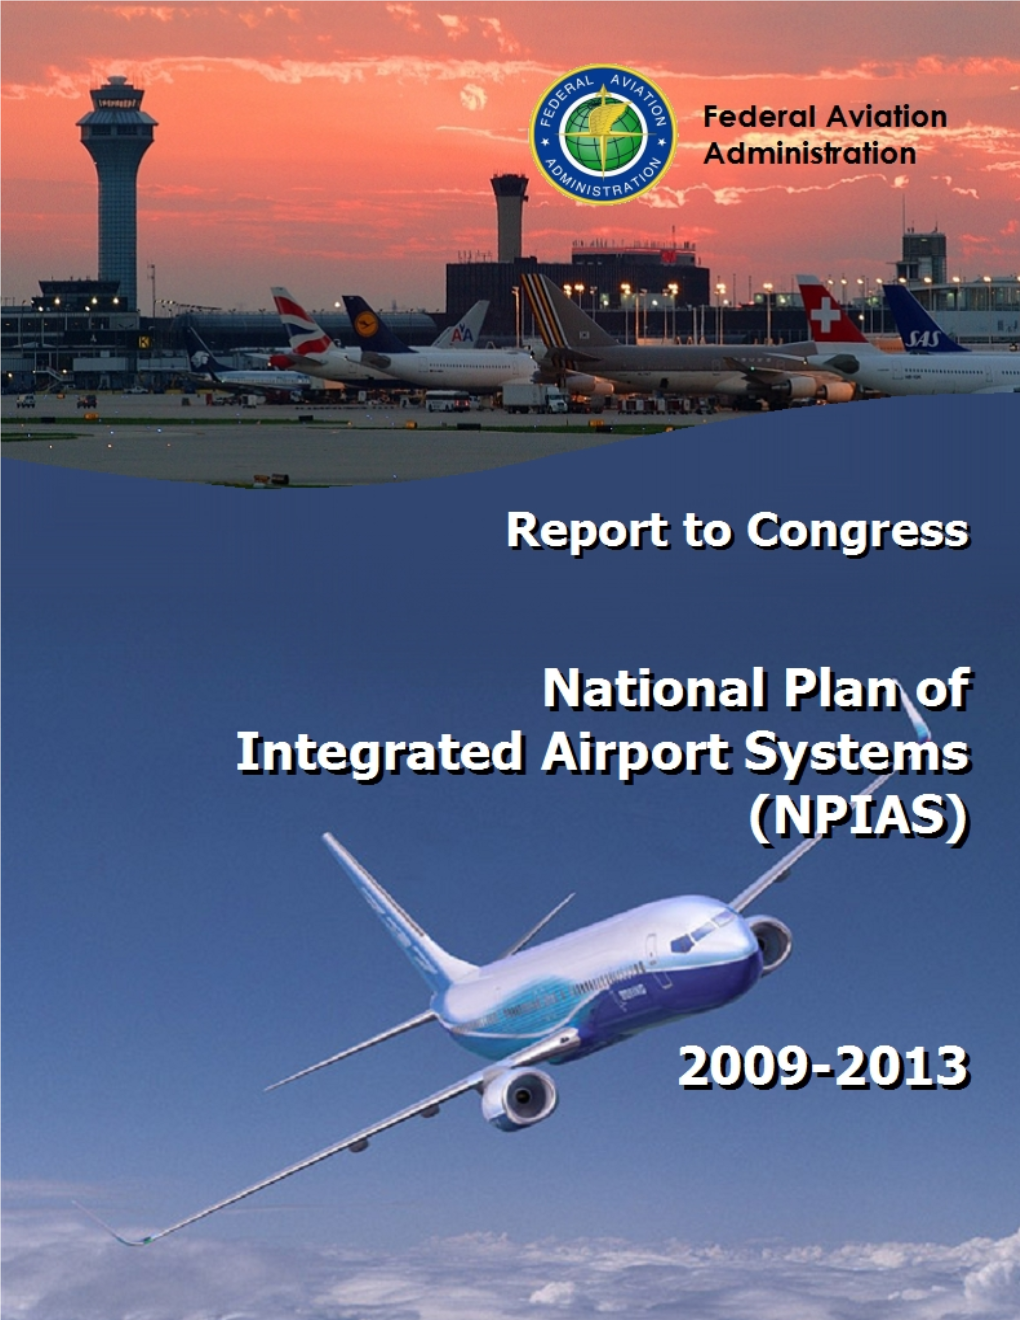 National Plan of Integrated Airport Systems (NPIAS) (2009-2013)